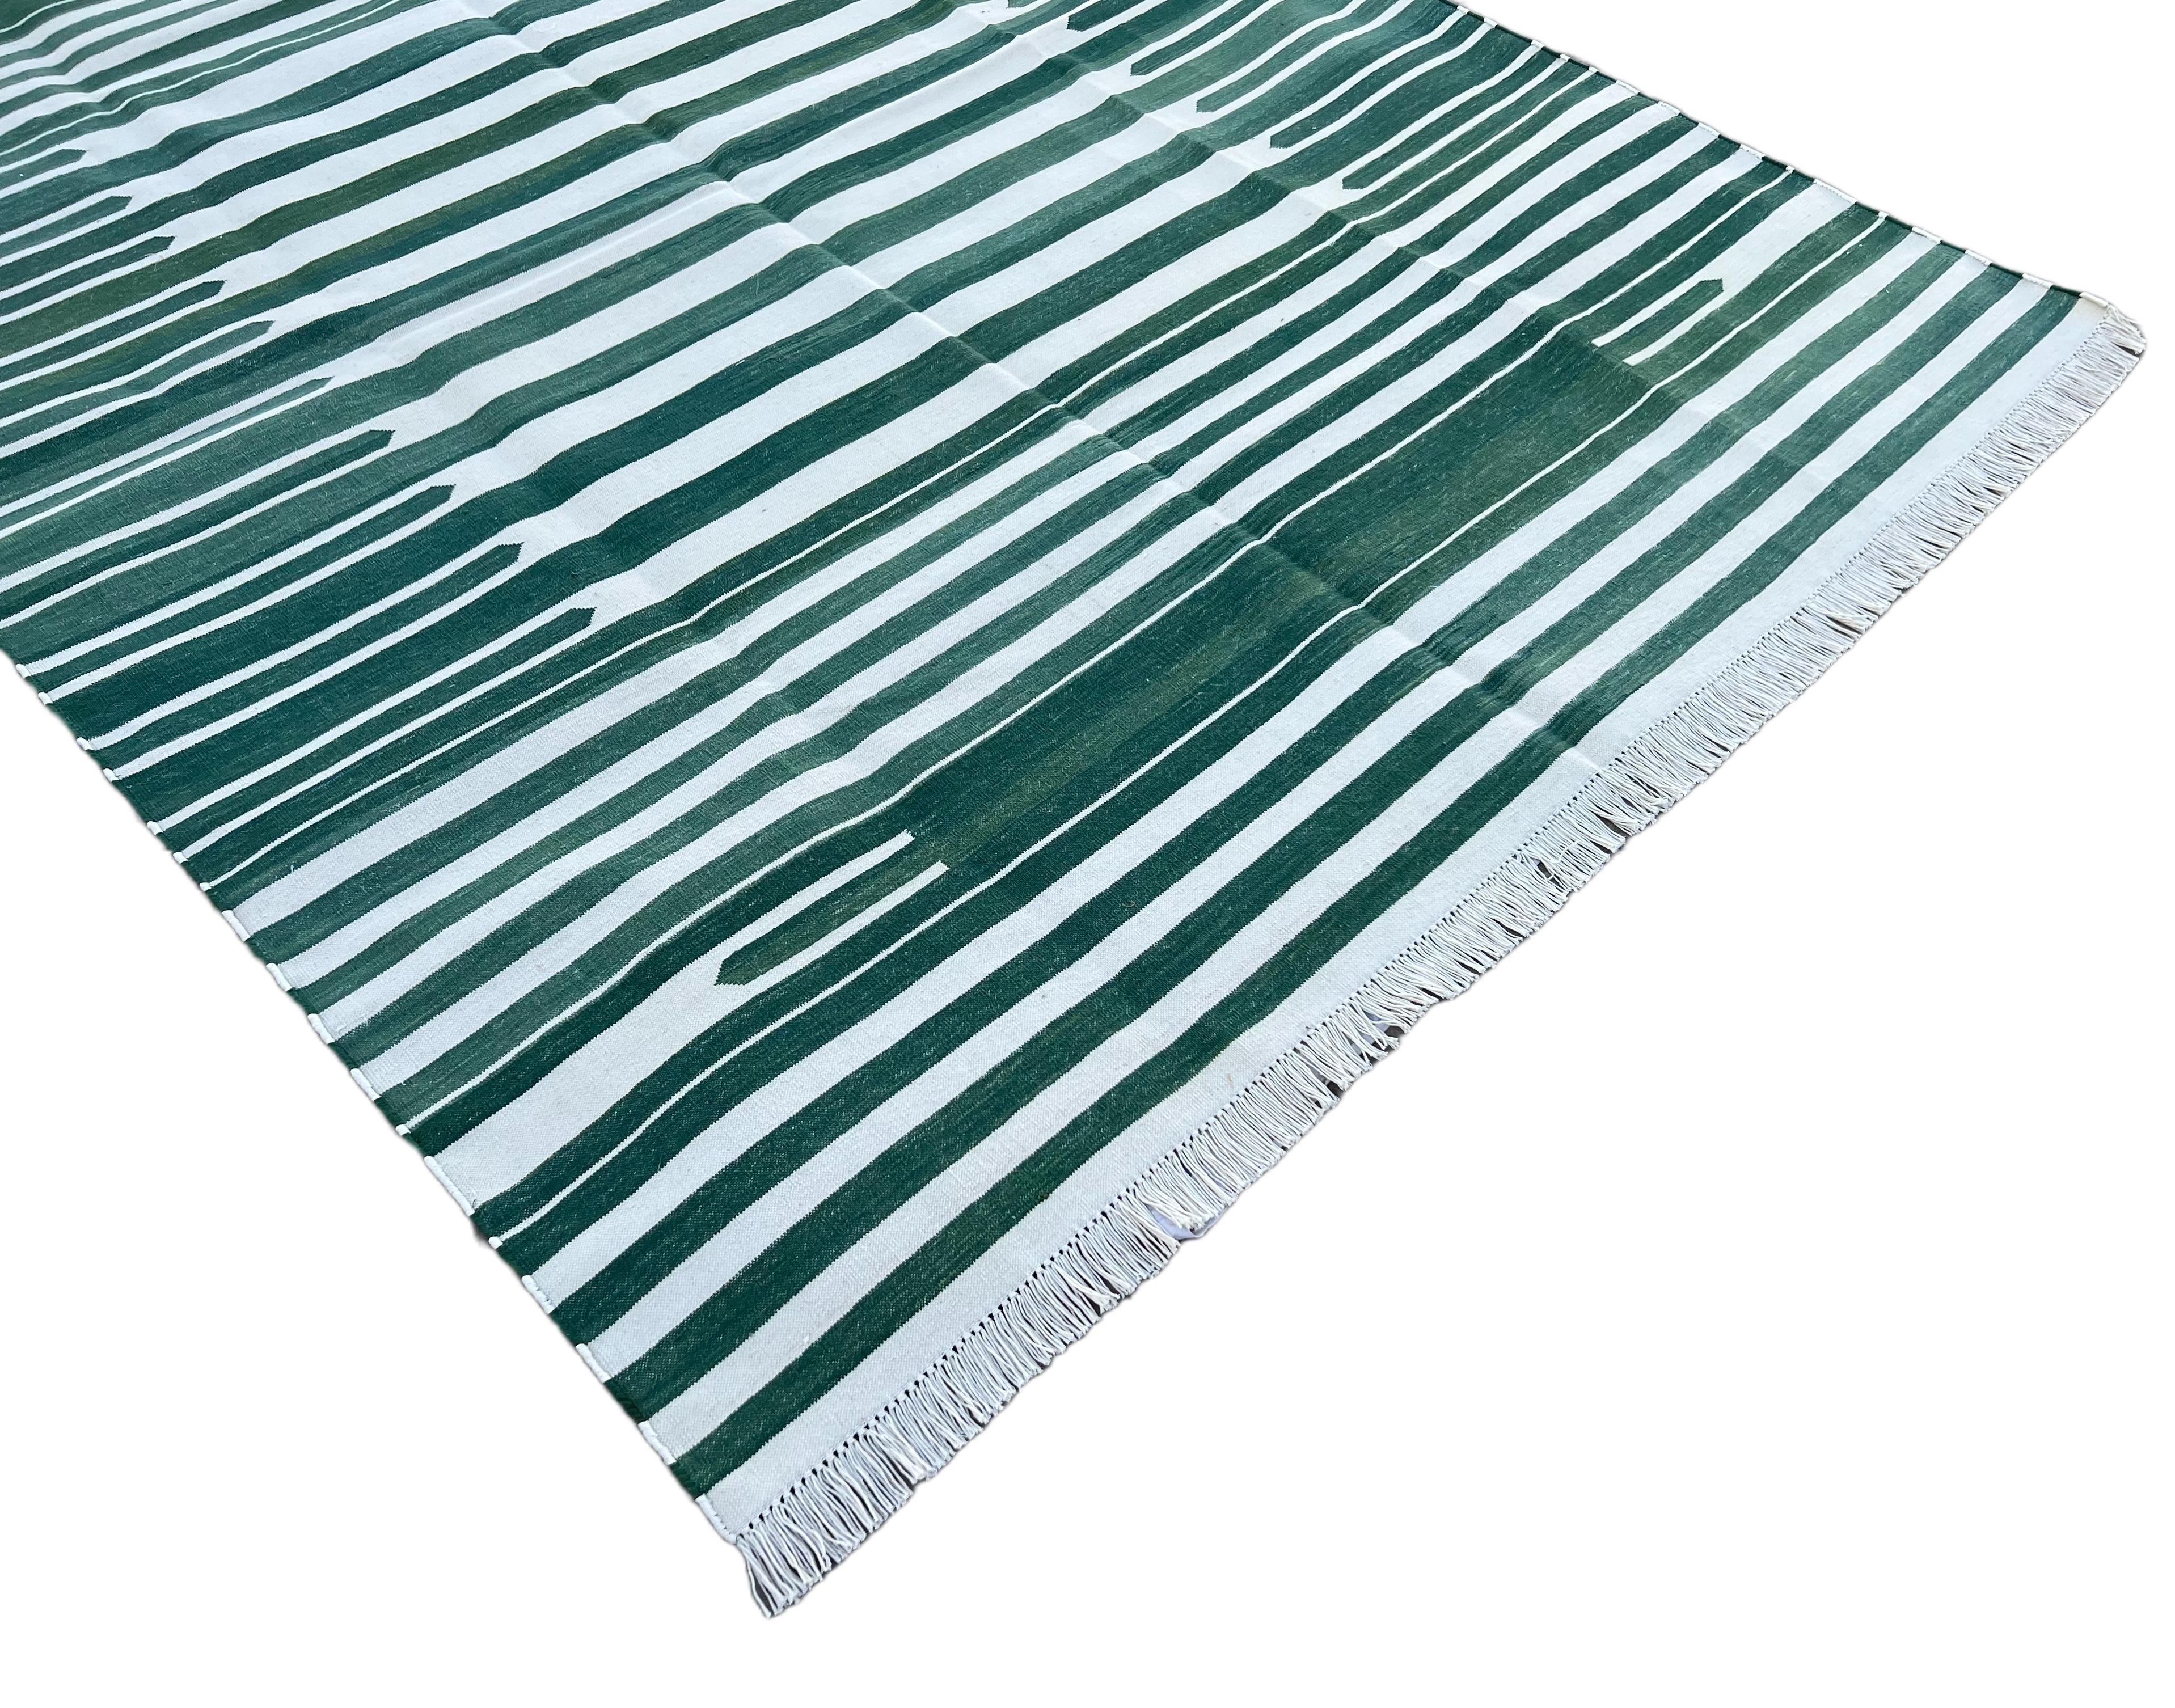 Hand-Woven Handmade Cotton Area Flat Weave Rug, Green And White Striped Indian Dhurrie Rug For Sale